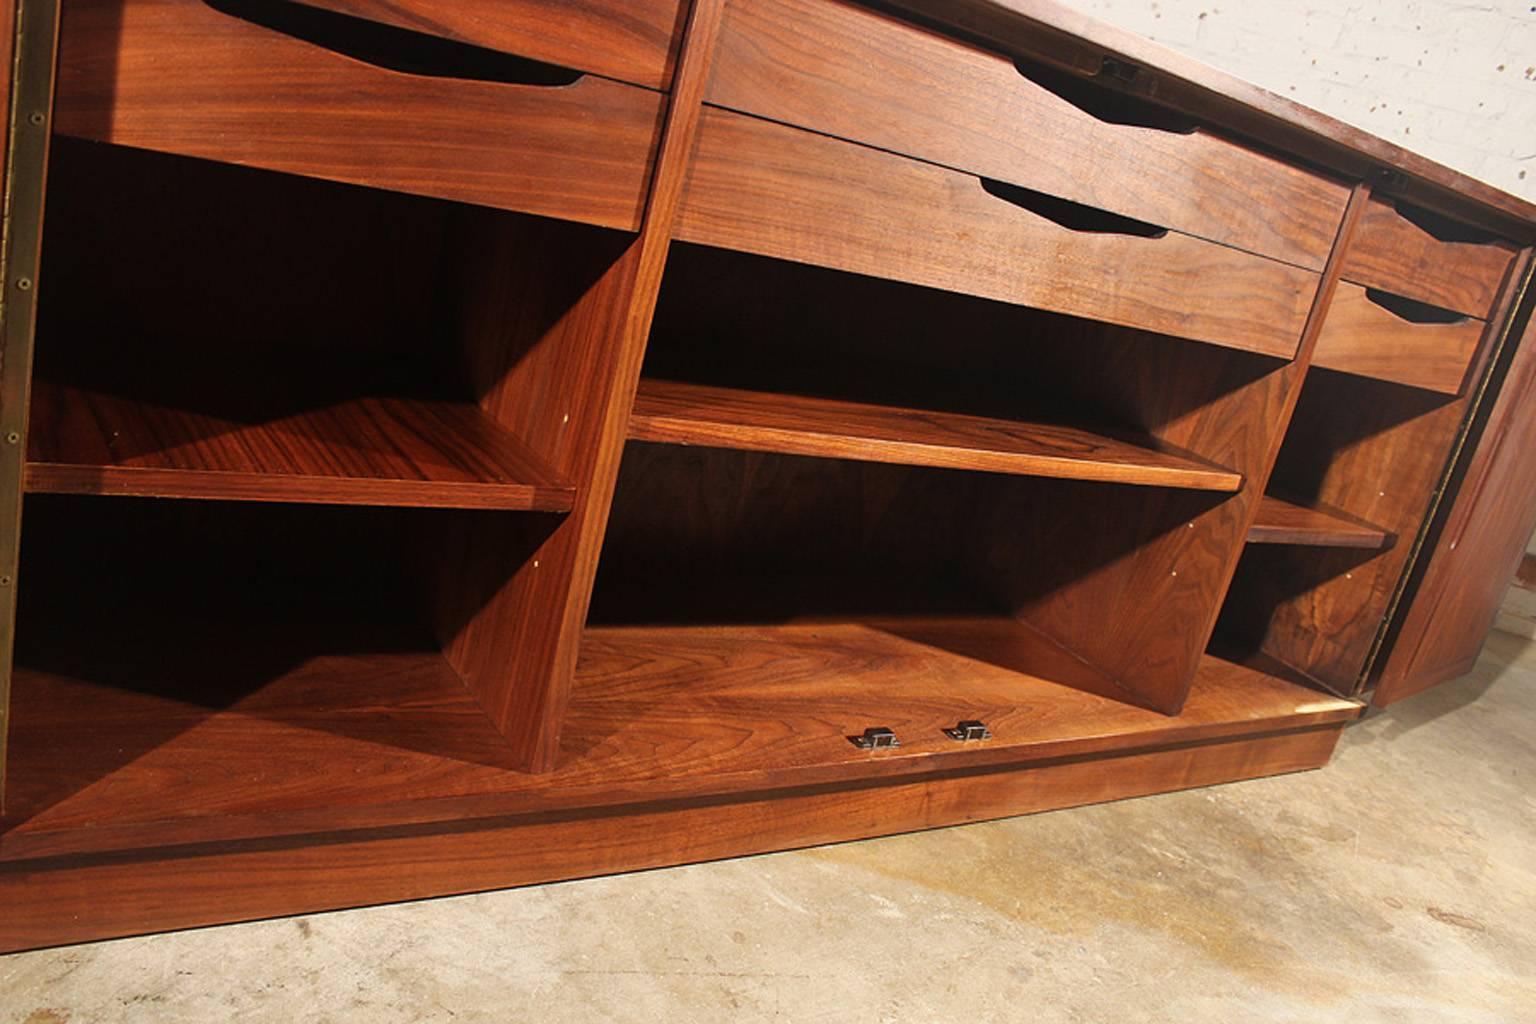 Mid-Century Modern Honduran Rosewood Bookmatched Cabinet by Jack Cartwright for Founders Furniture